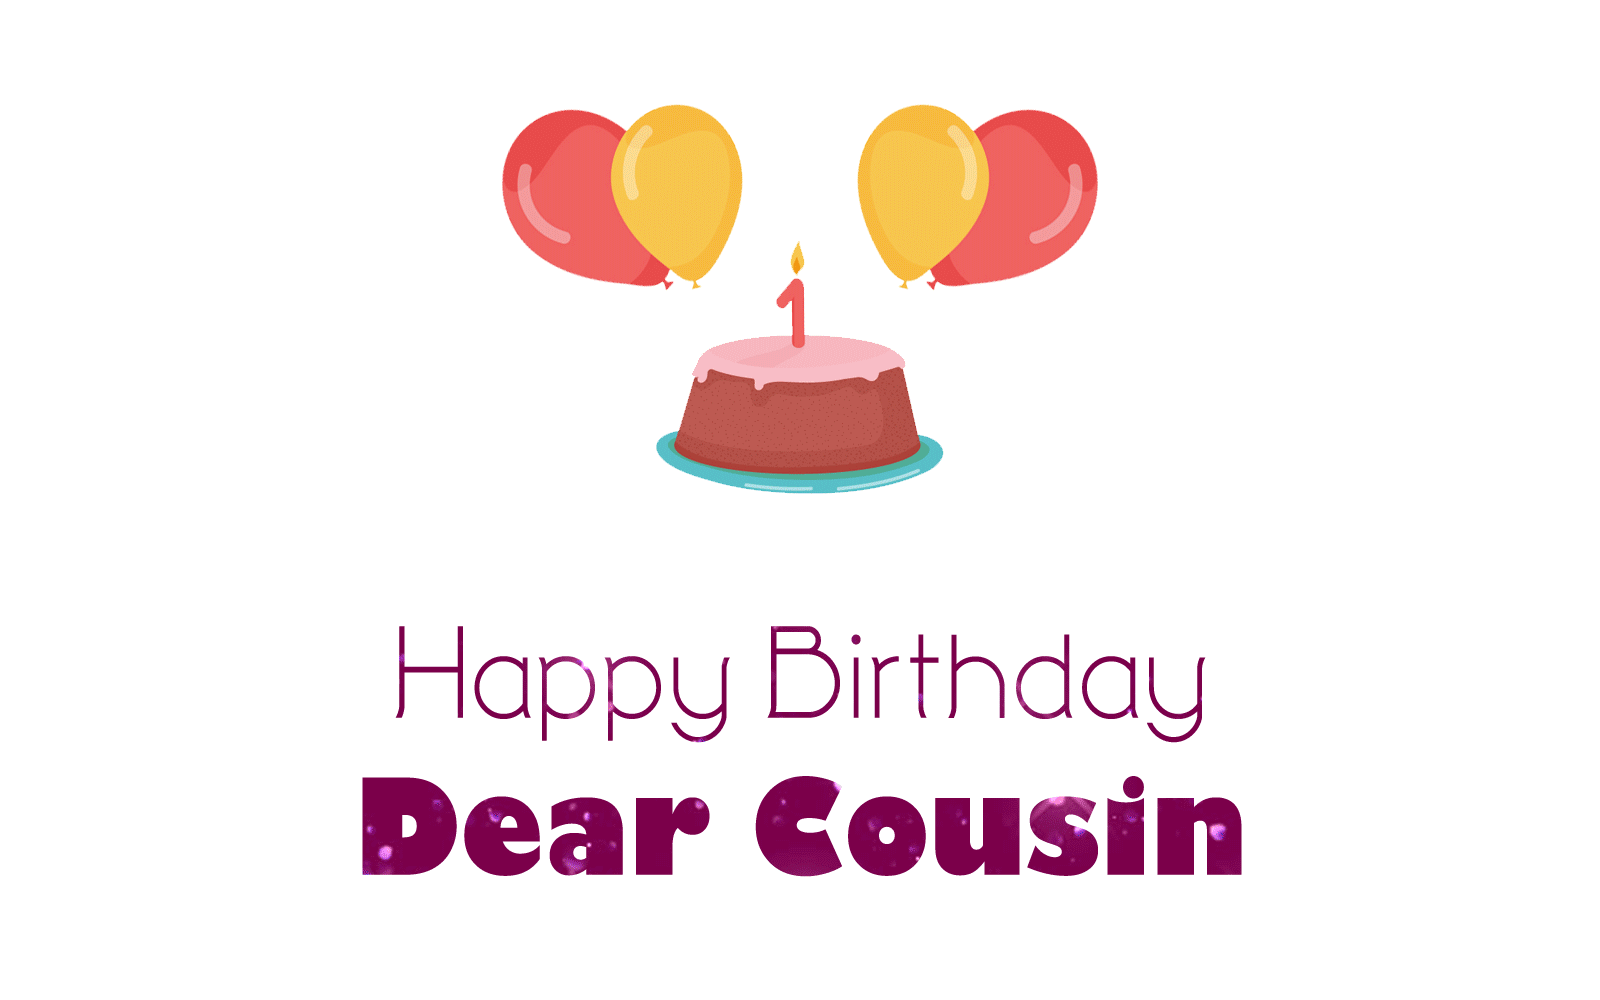 53+ Happy Birthday Cousin Brother/Sister – Wishes, Quotes, Cake Images, Messages, & Status